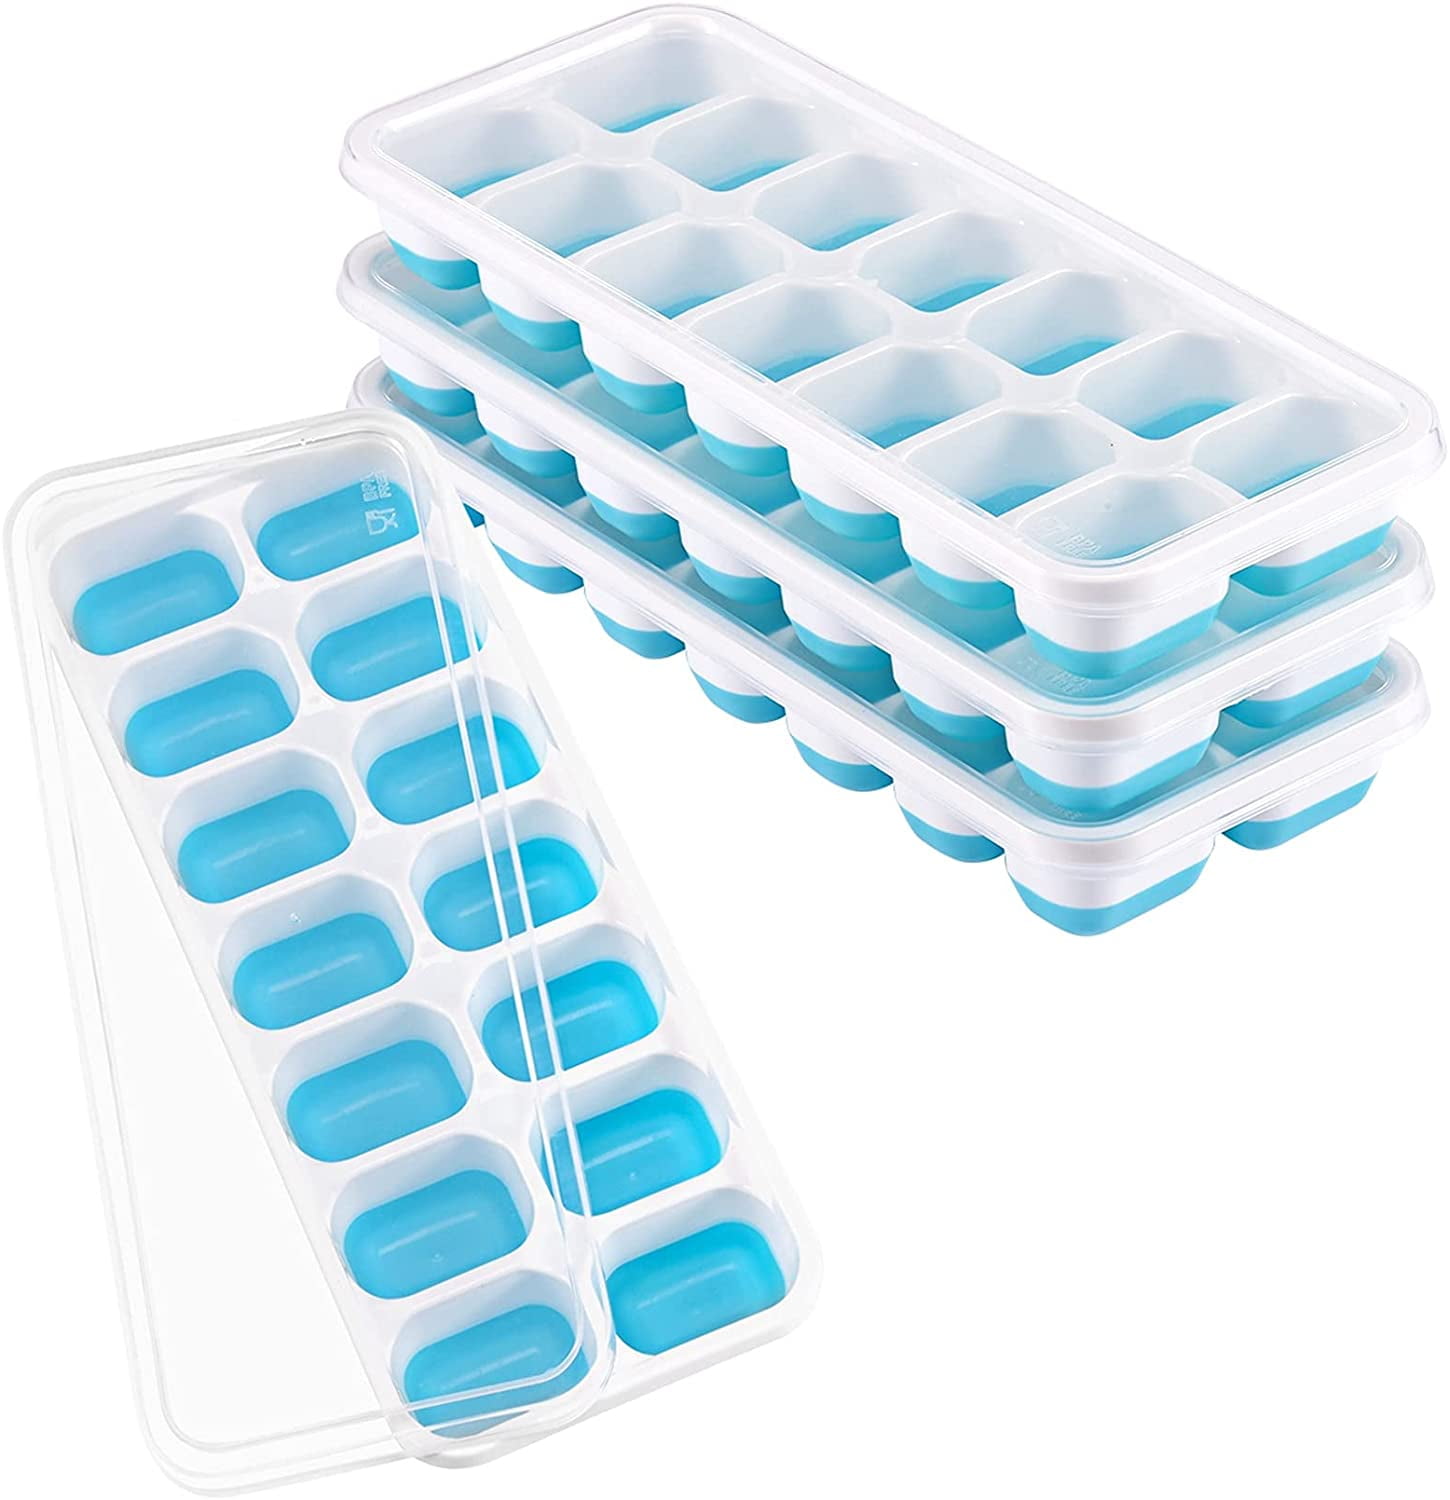 Easy-Release Silicone Flexible 14 With Lid OMorc Ice Cube Trays 4 Pack 